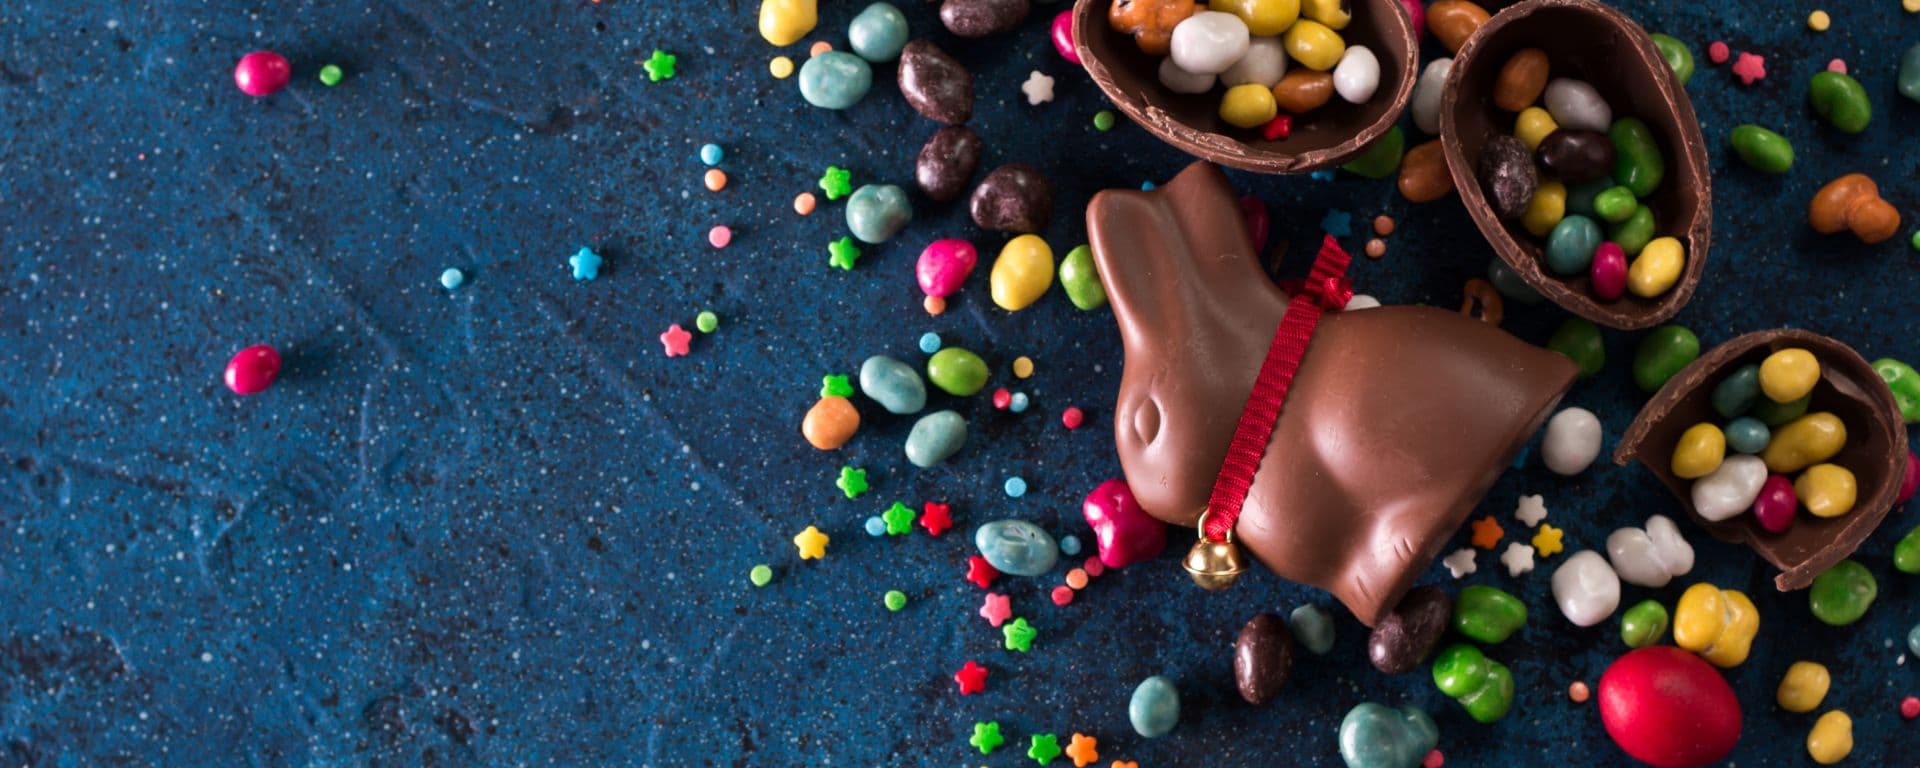 Tasty Easter Food Traditions In South Africa You Must Try